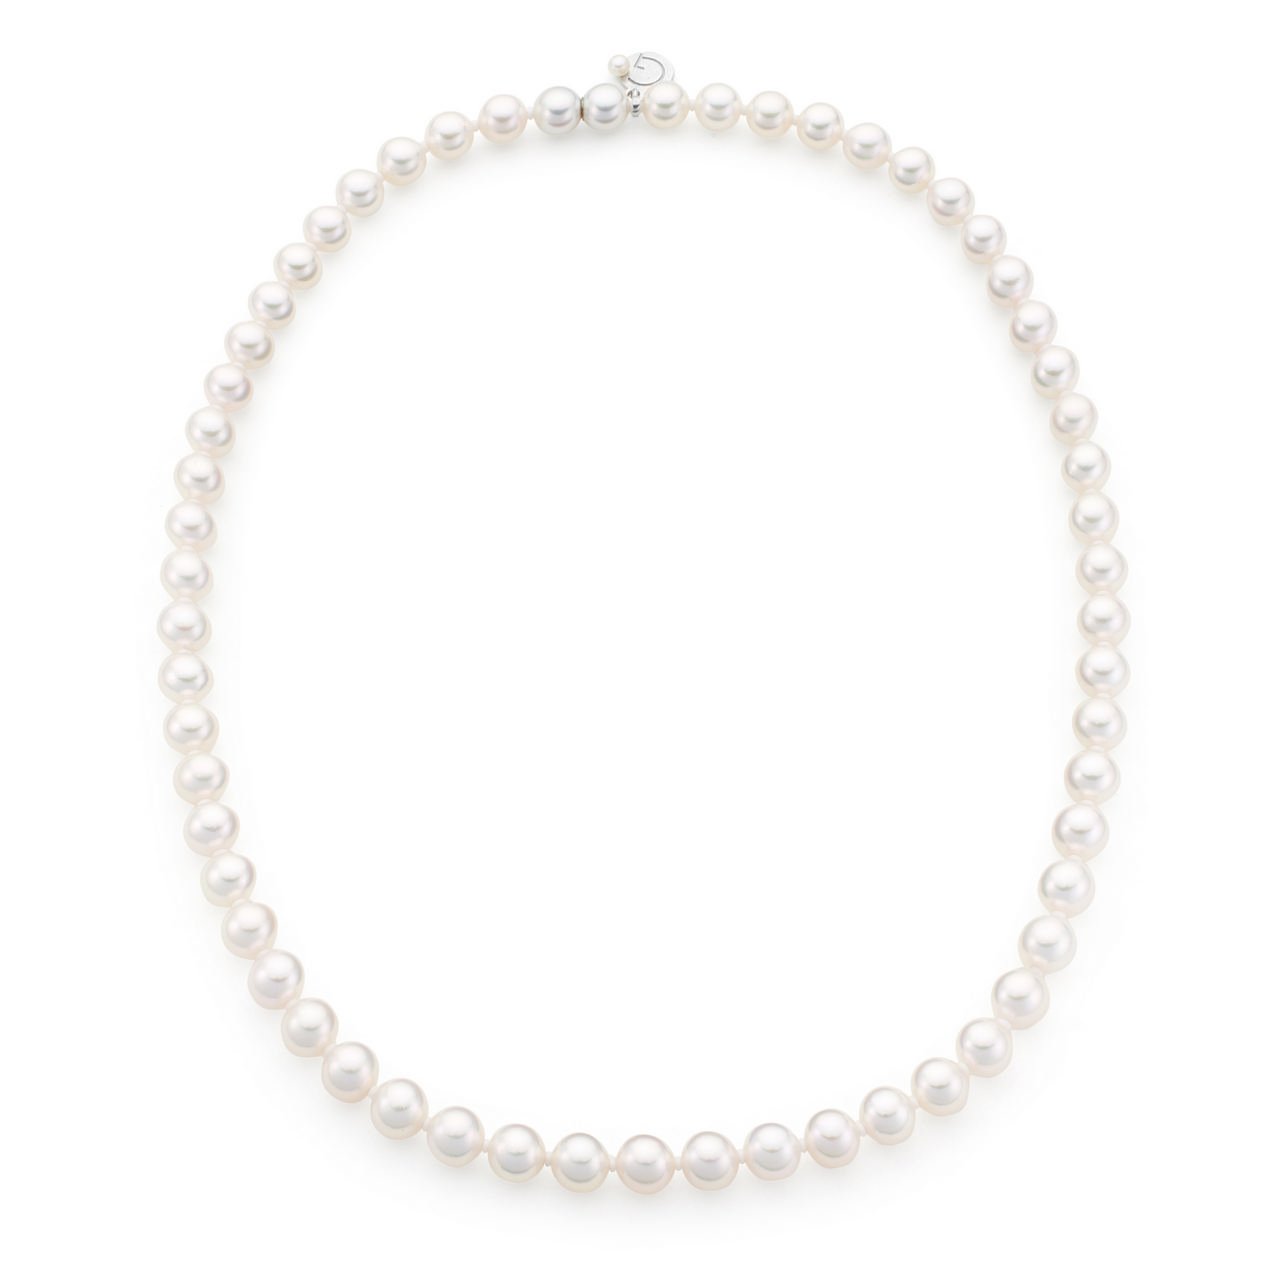 5 Double Strand Pearl Necklaces Perfect For Any Occasion - PearlsOnly ::  PearlsOnly